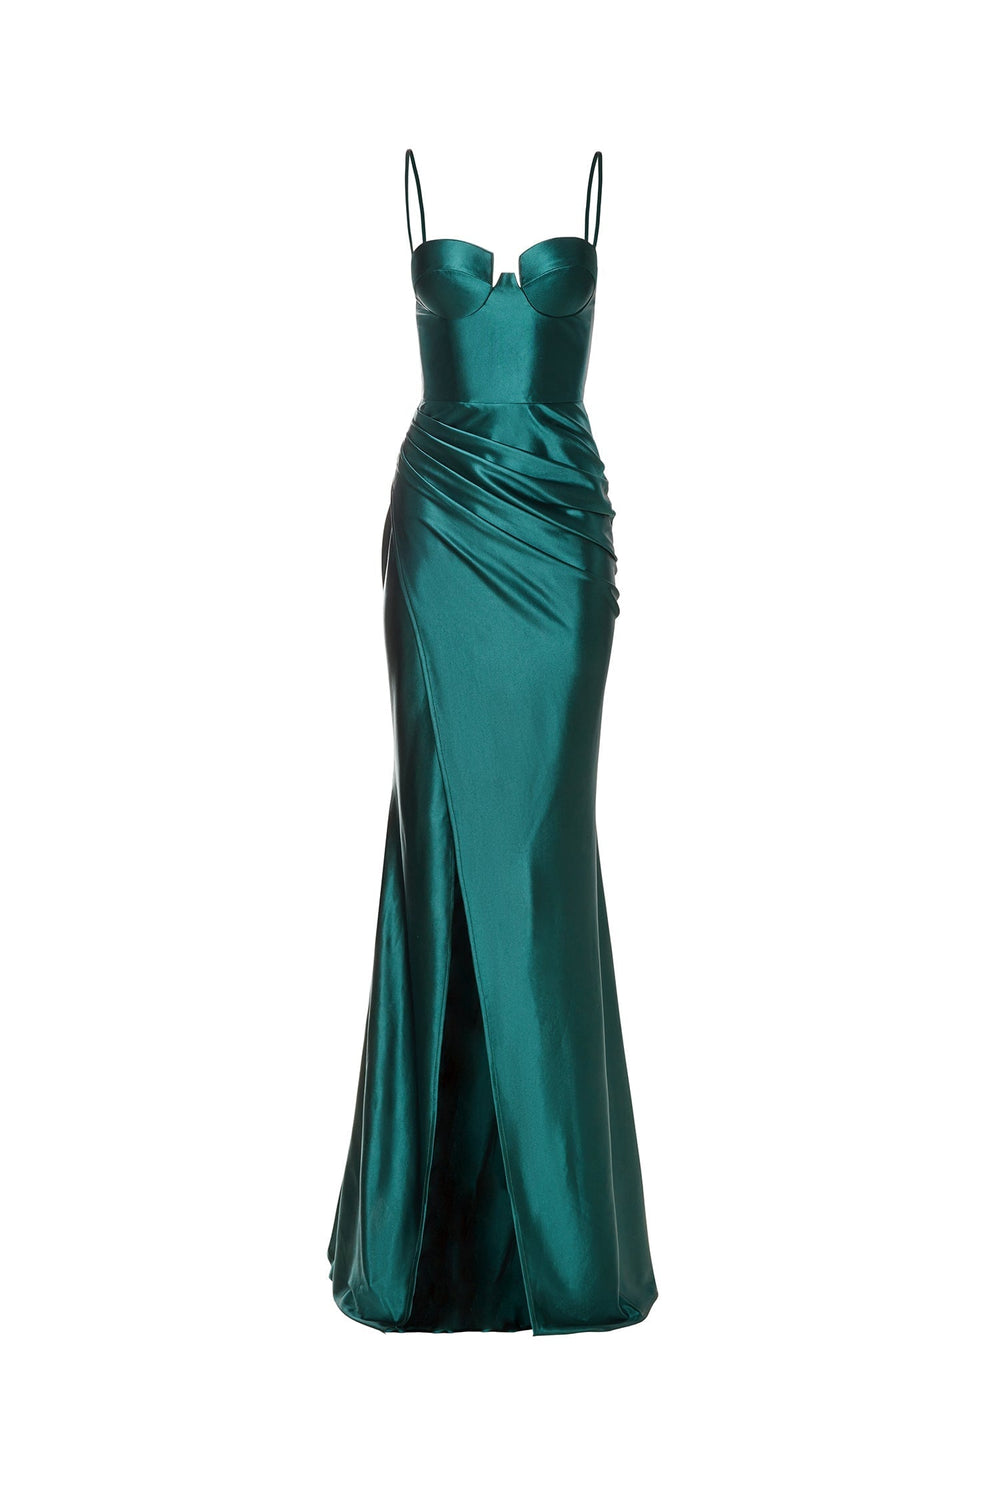 Nevali - Emerald Satin Gown with Dainty Straps and Side Slit